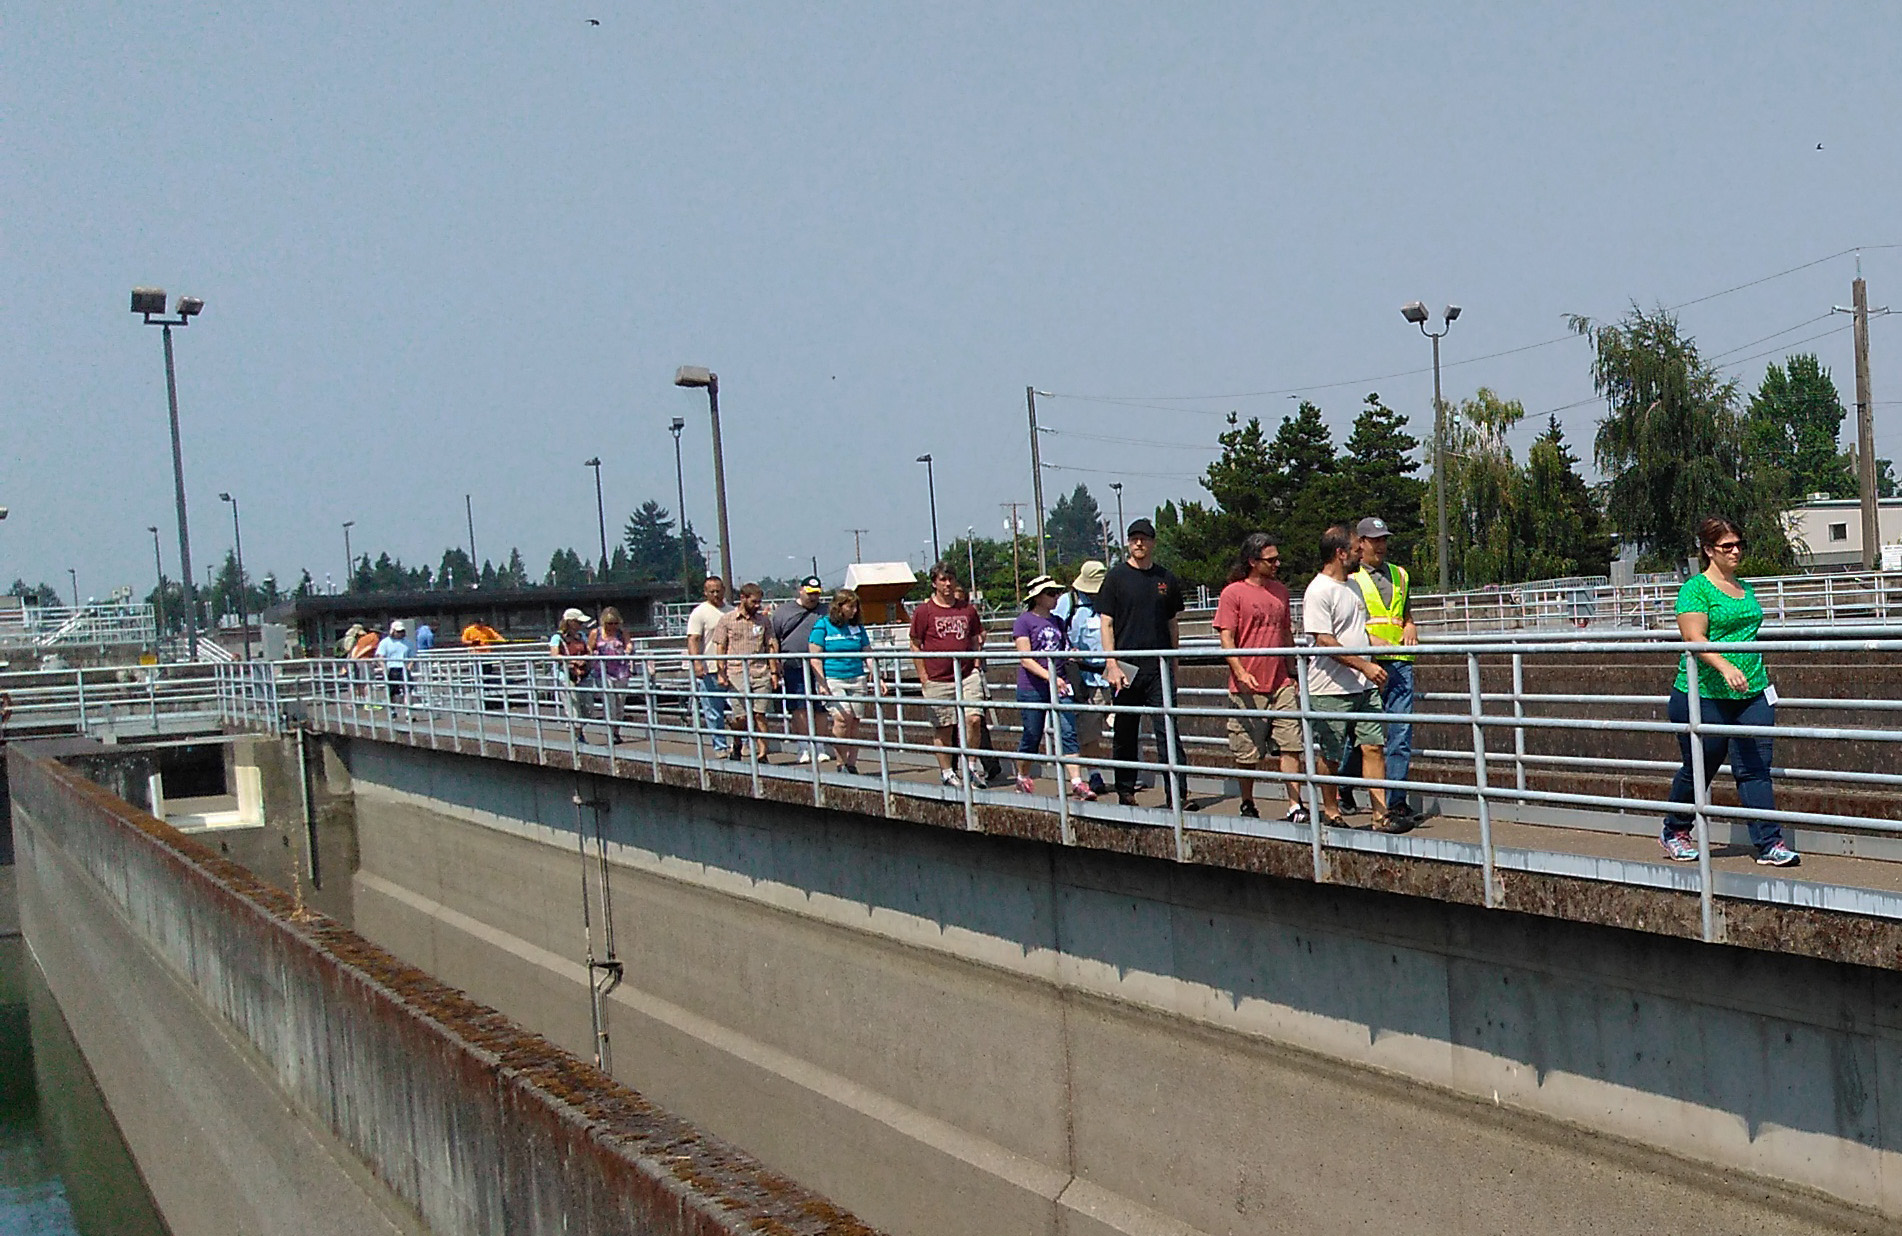 Tour at the Wastewater Treatment Plant